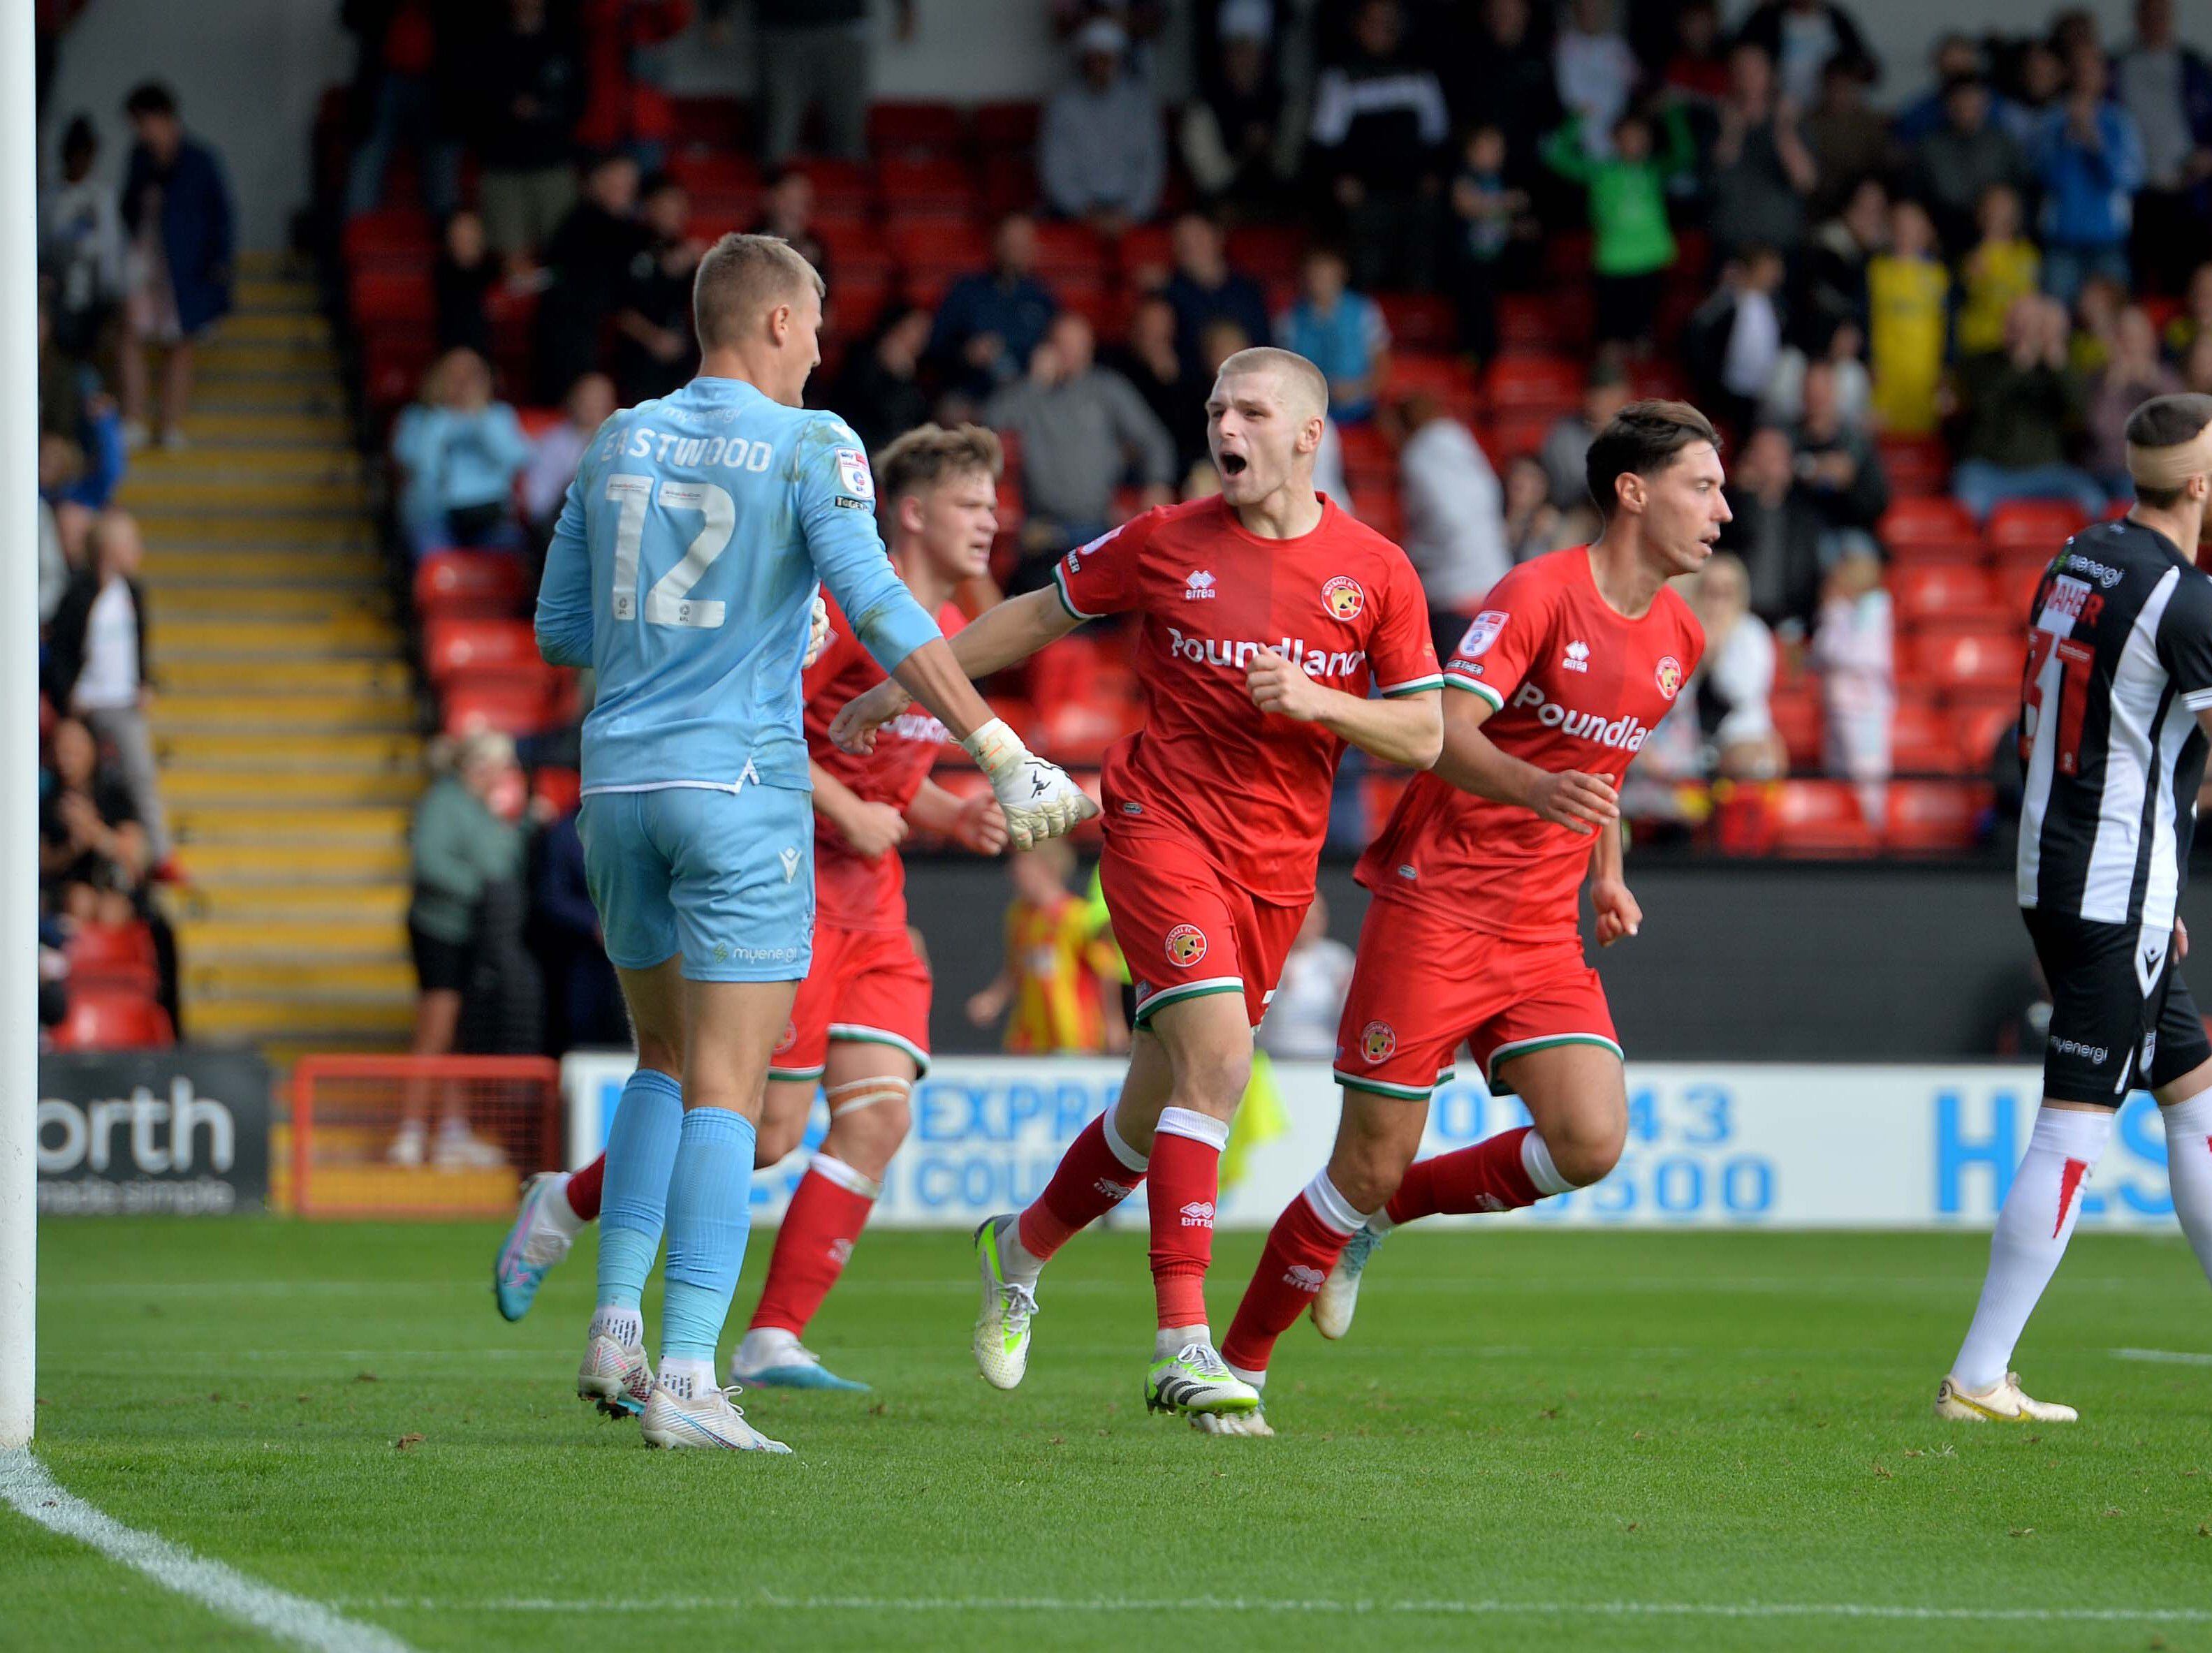 Walsall 1 Grimsby 1 - Report 